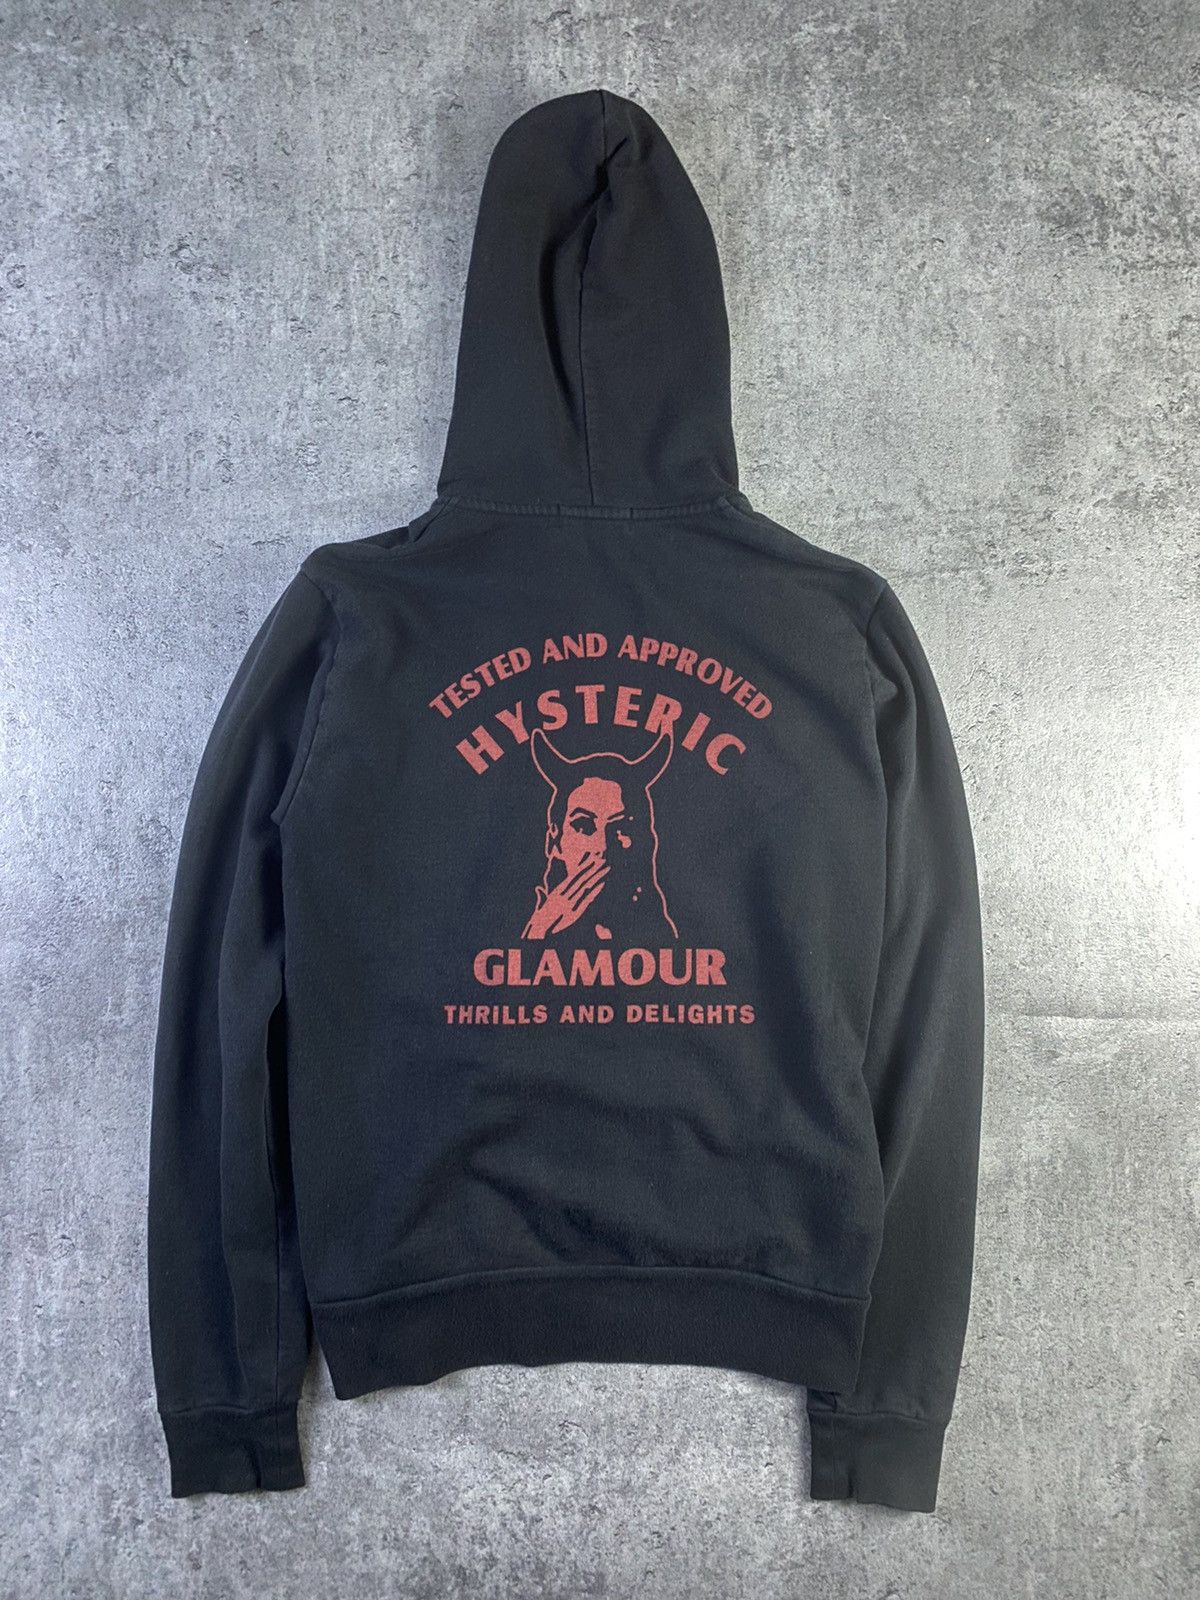 Pre-owned Hysteric Glamour X Kapital Kountry Hysteric Glamour Black Zip Hoodie